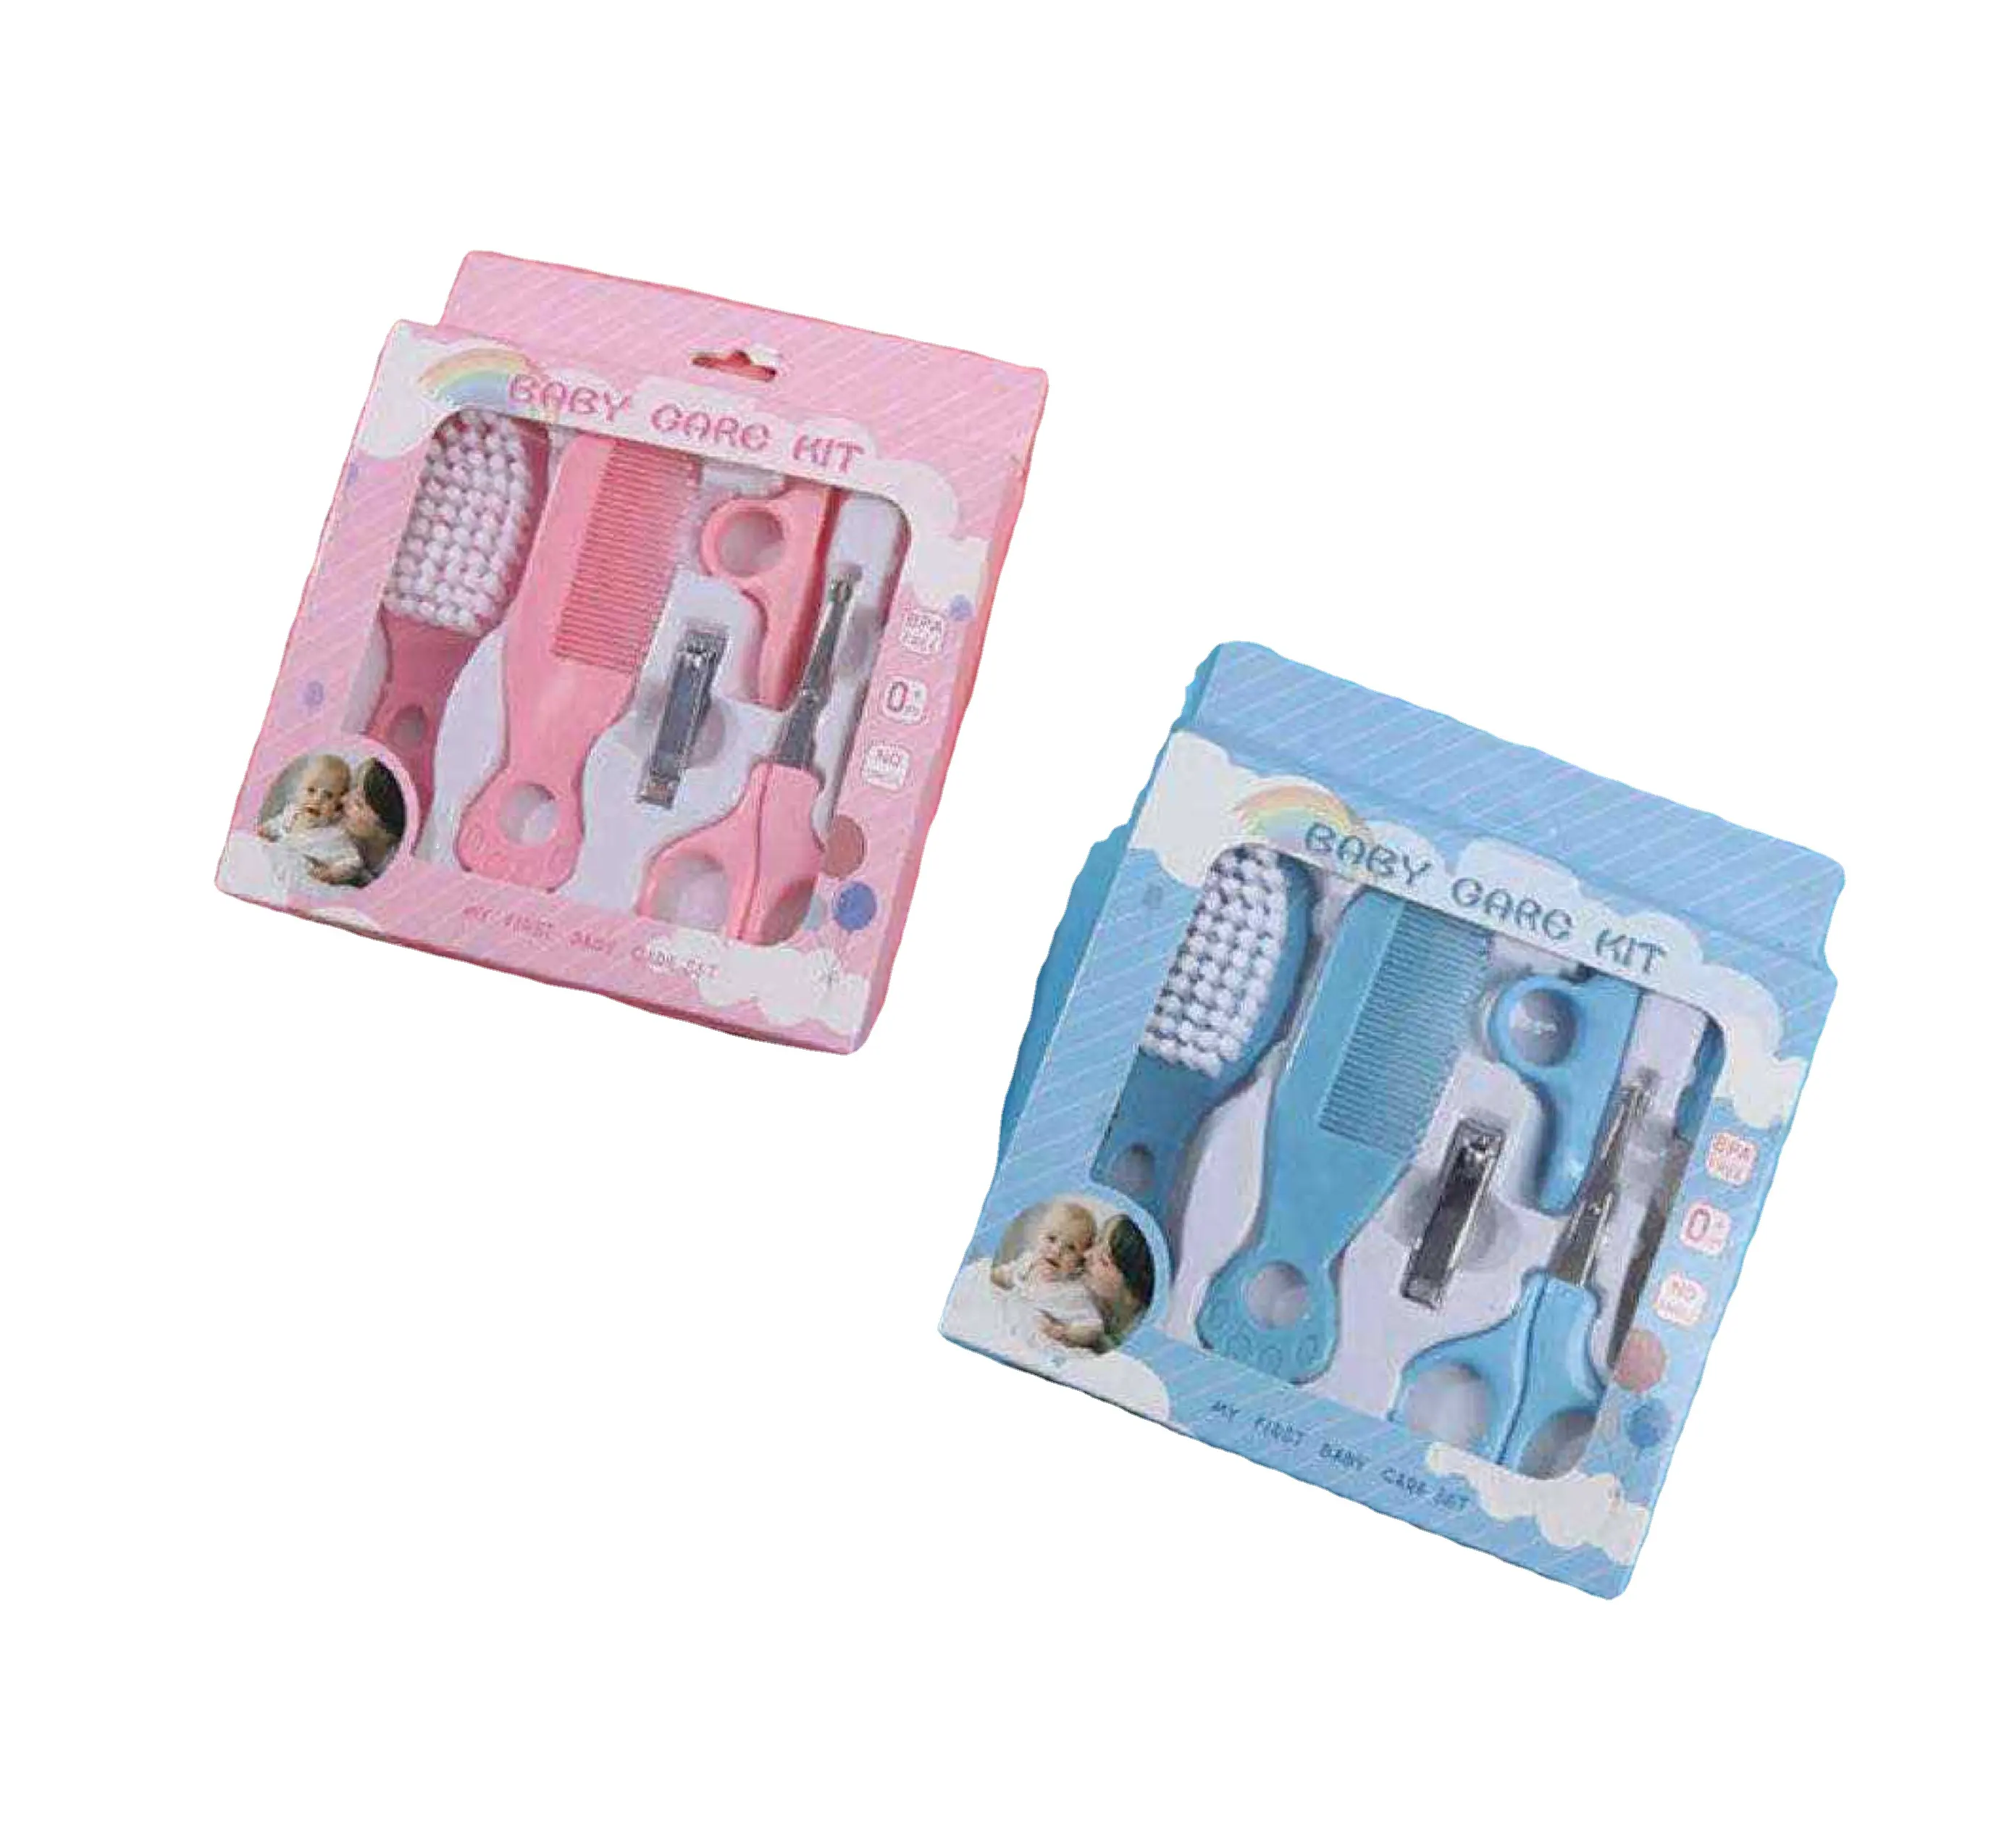 High quality 6 in1 set baby nursing bag baby comb brush safety scissors set pink blue infant care products